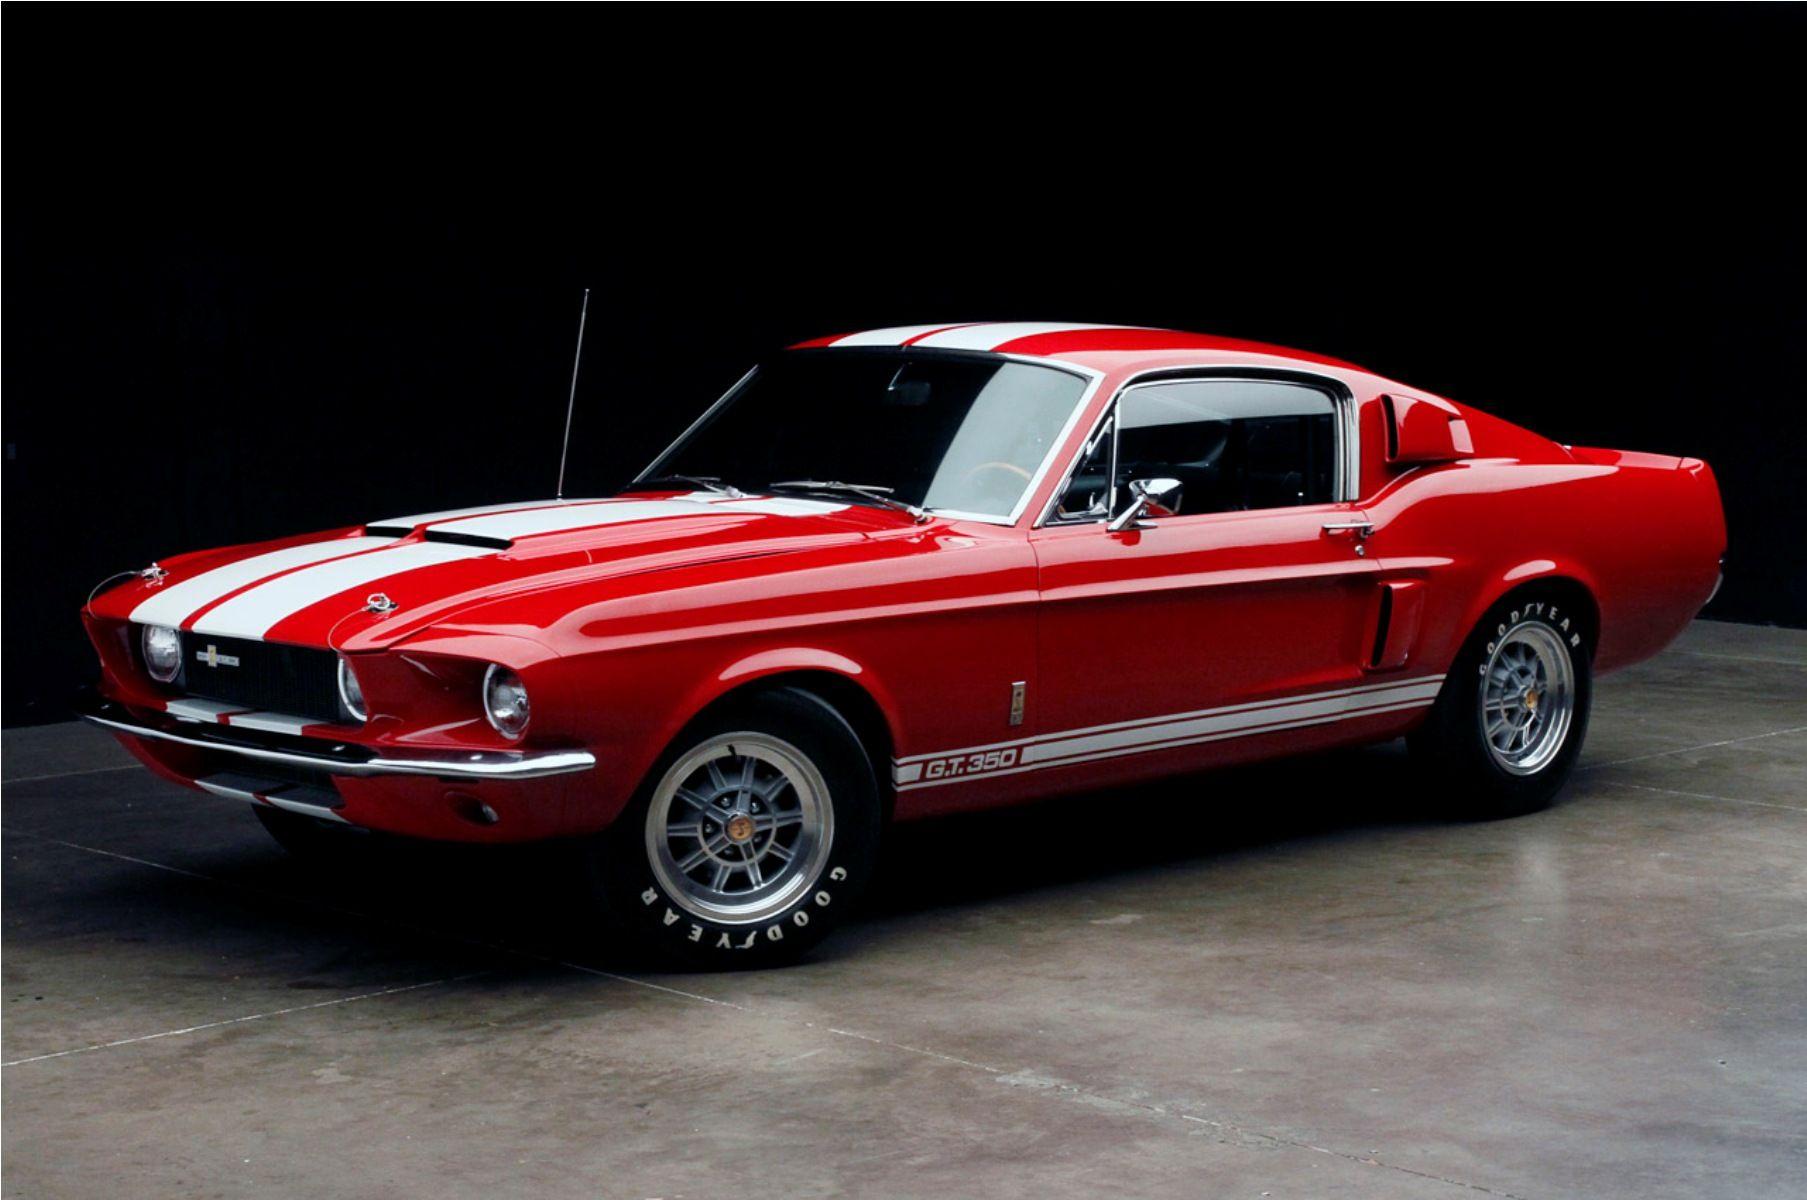 Red Ford Mustang G.T. 350. Wishlist. Car